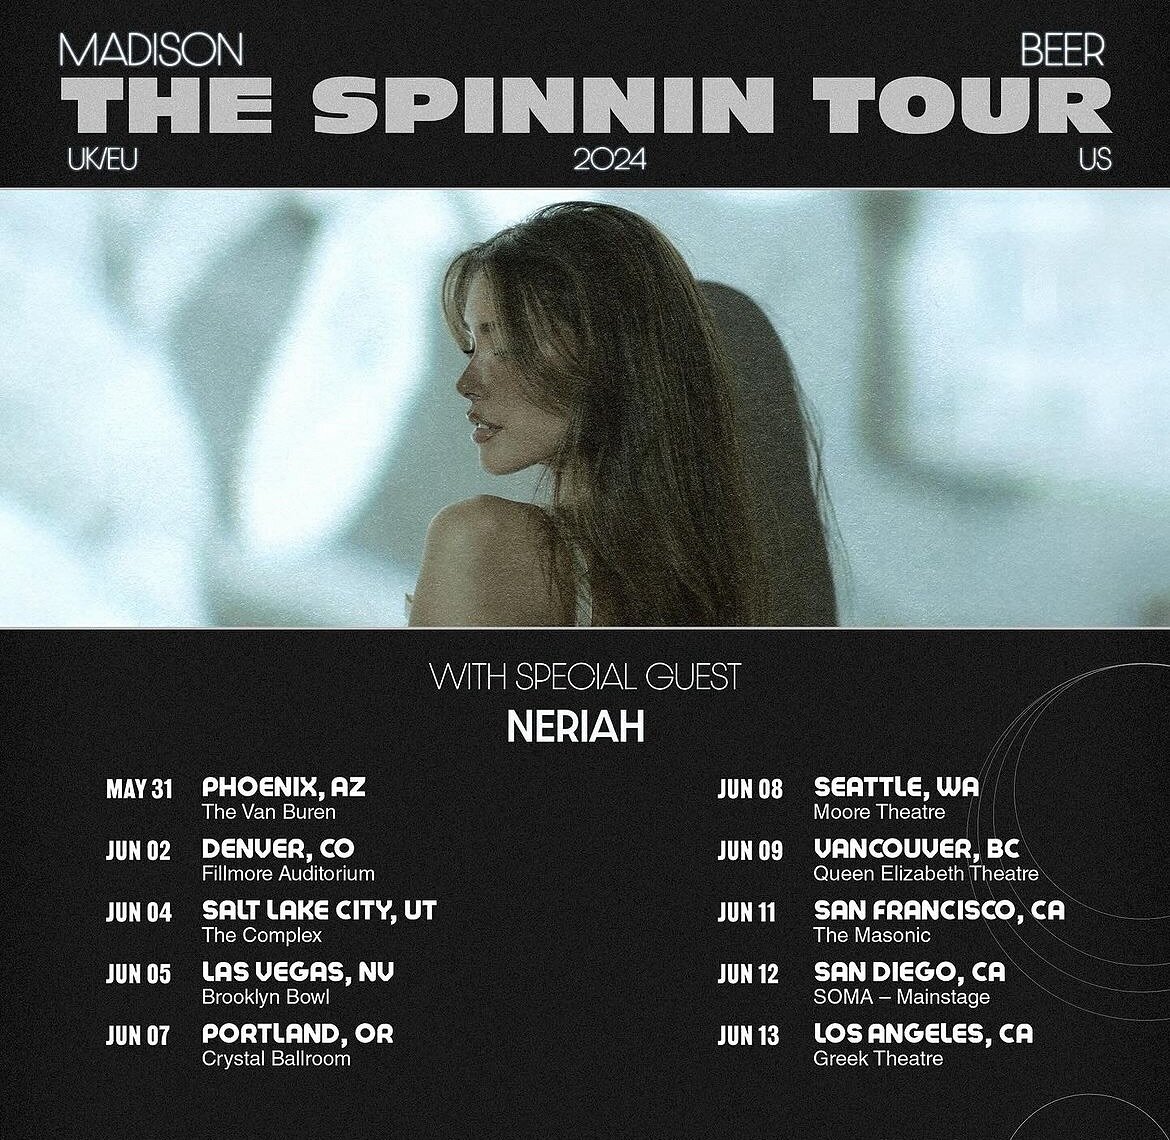 Just announced: NERIAH will be supporting Madison Beer May 31-June 13!!!